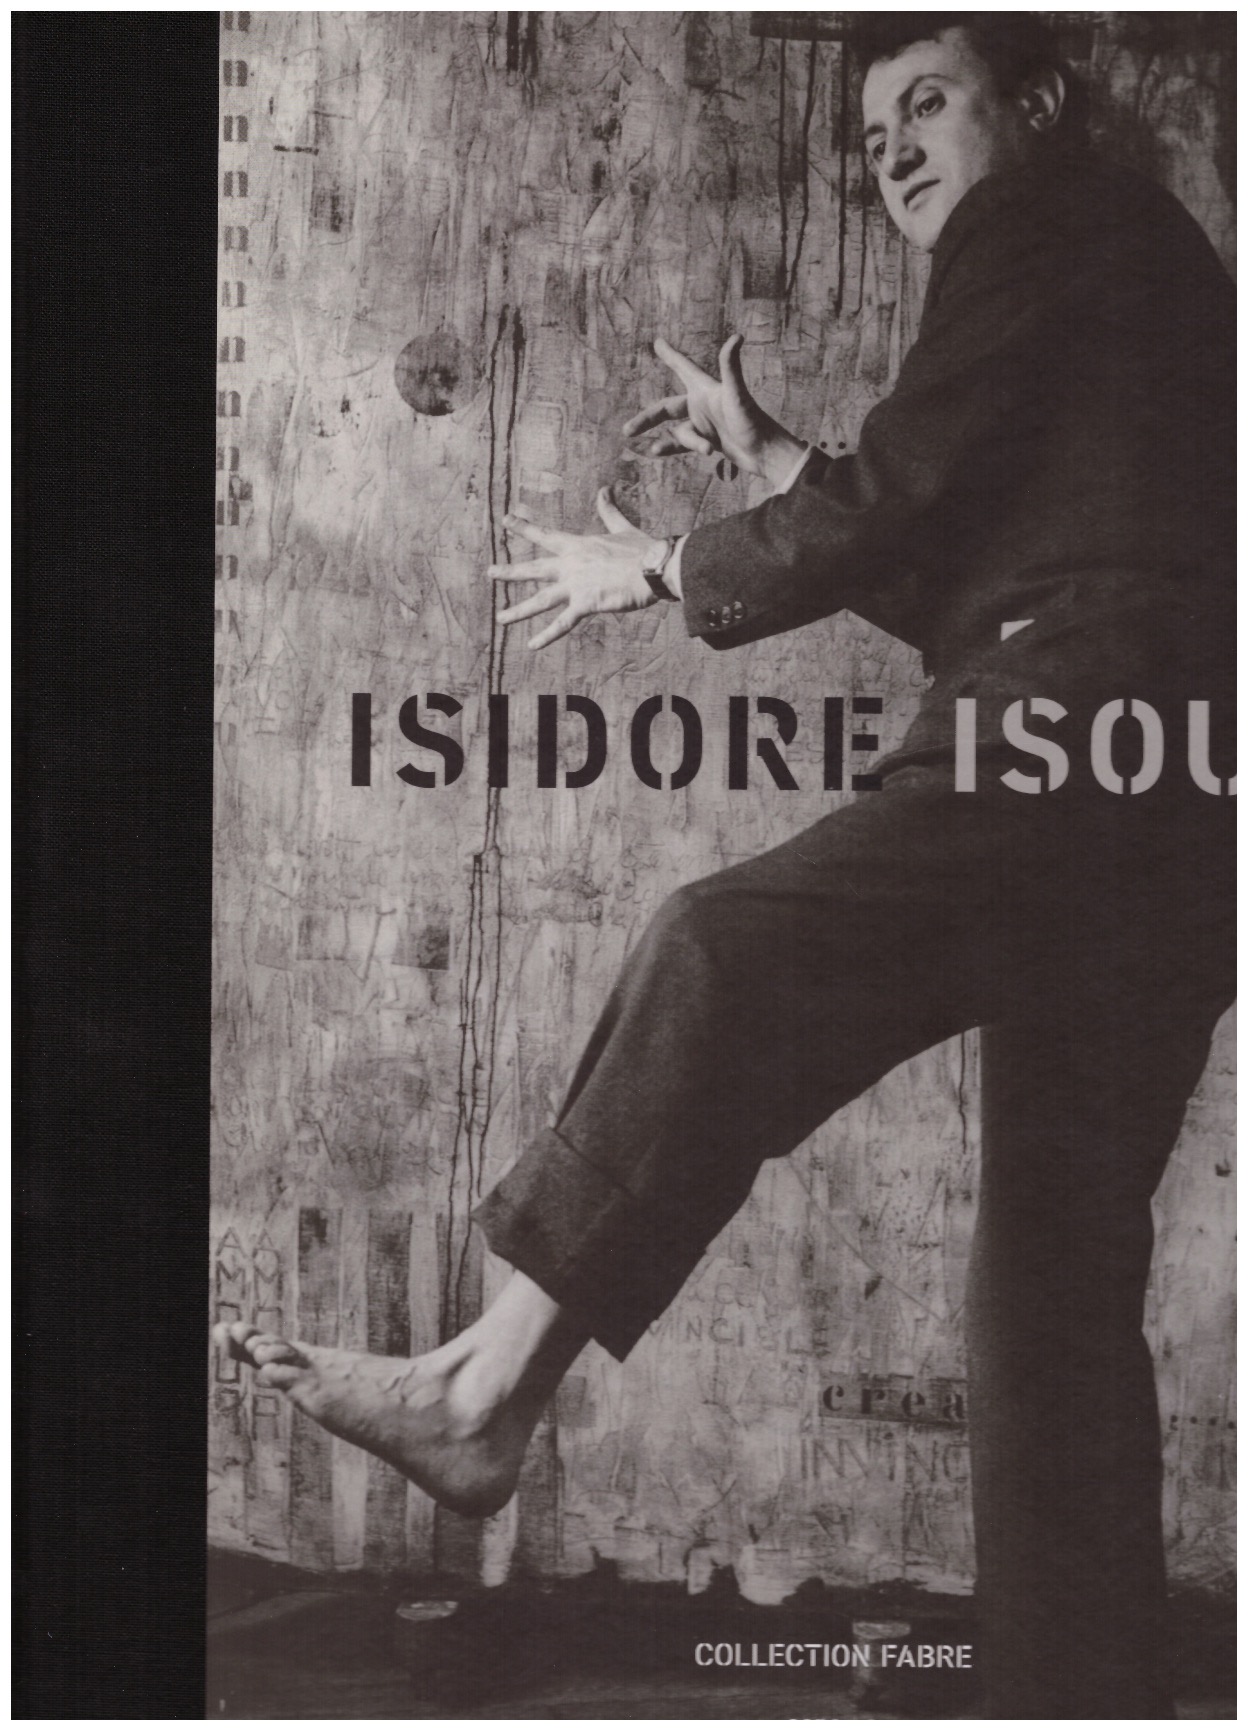 ISOU, Isidore; FABRE, Eric (ed.) - Isidore Isou. Collection Fabre, Vol. I